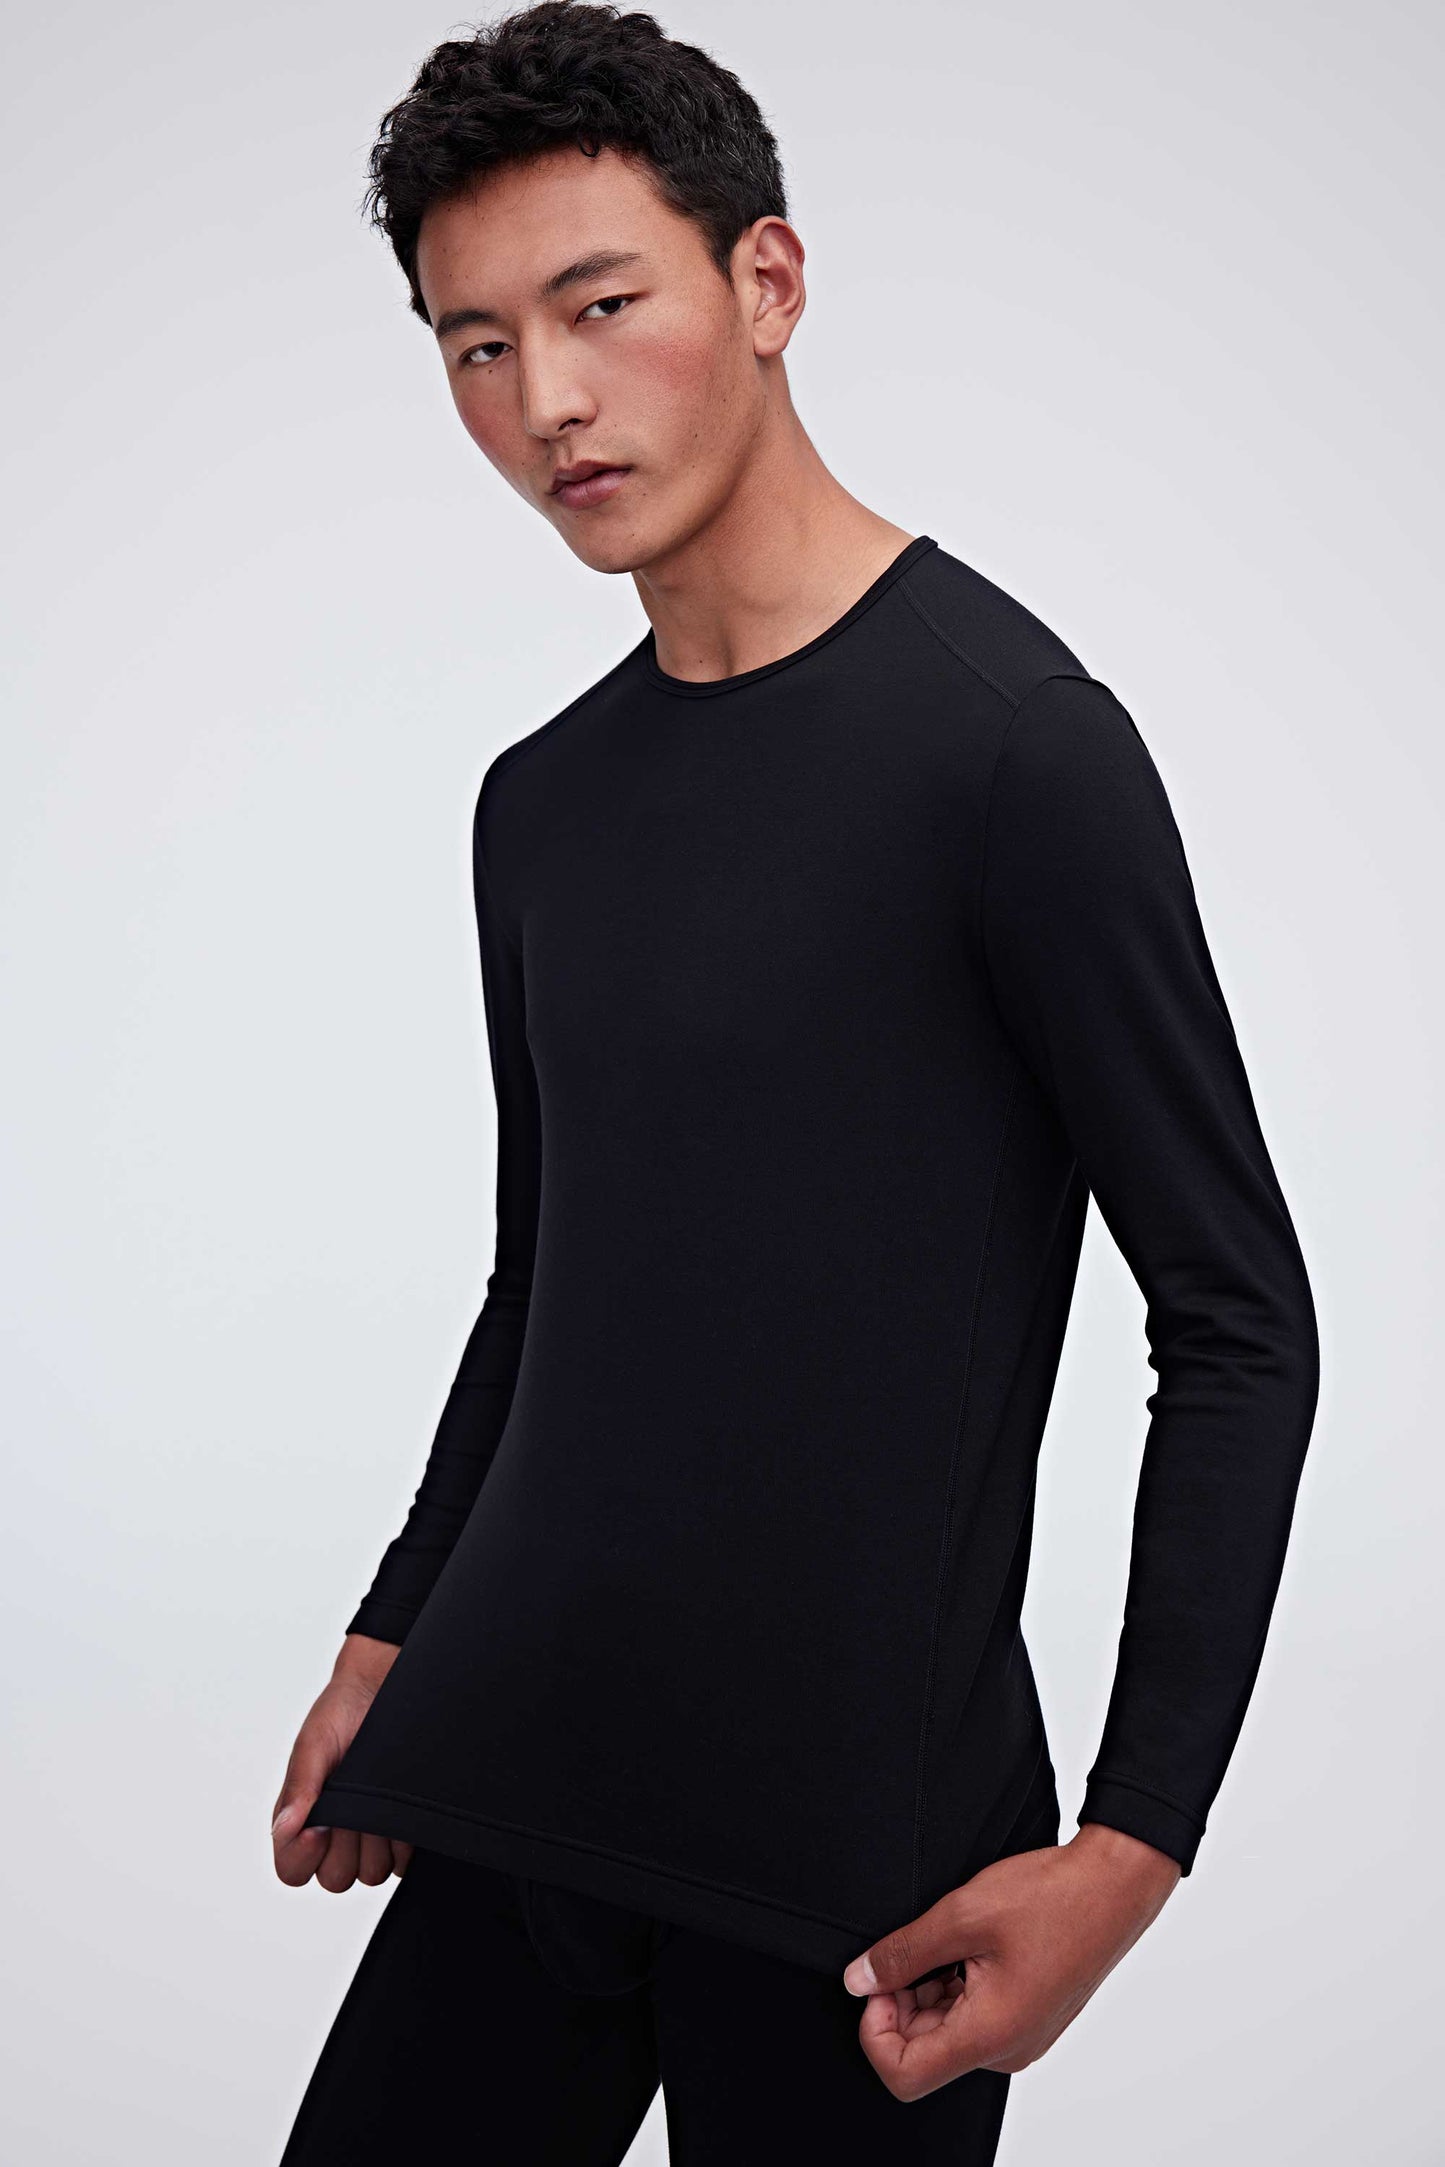 A man wearing a black thermal top